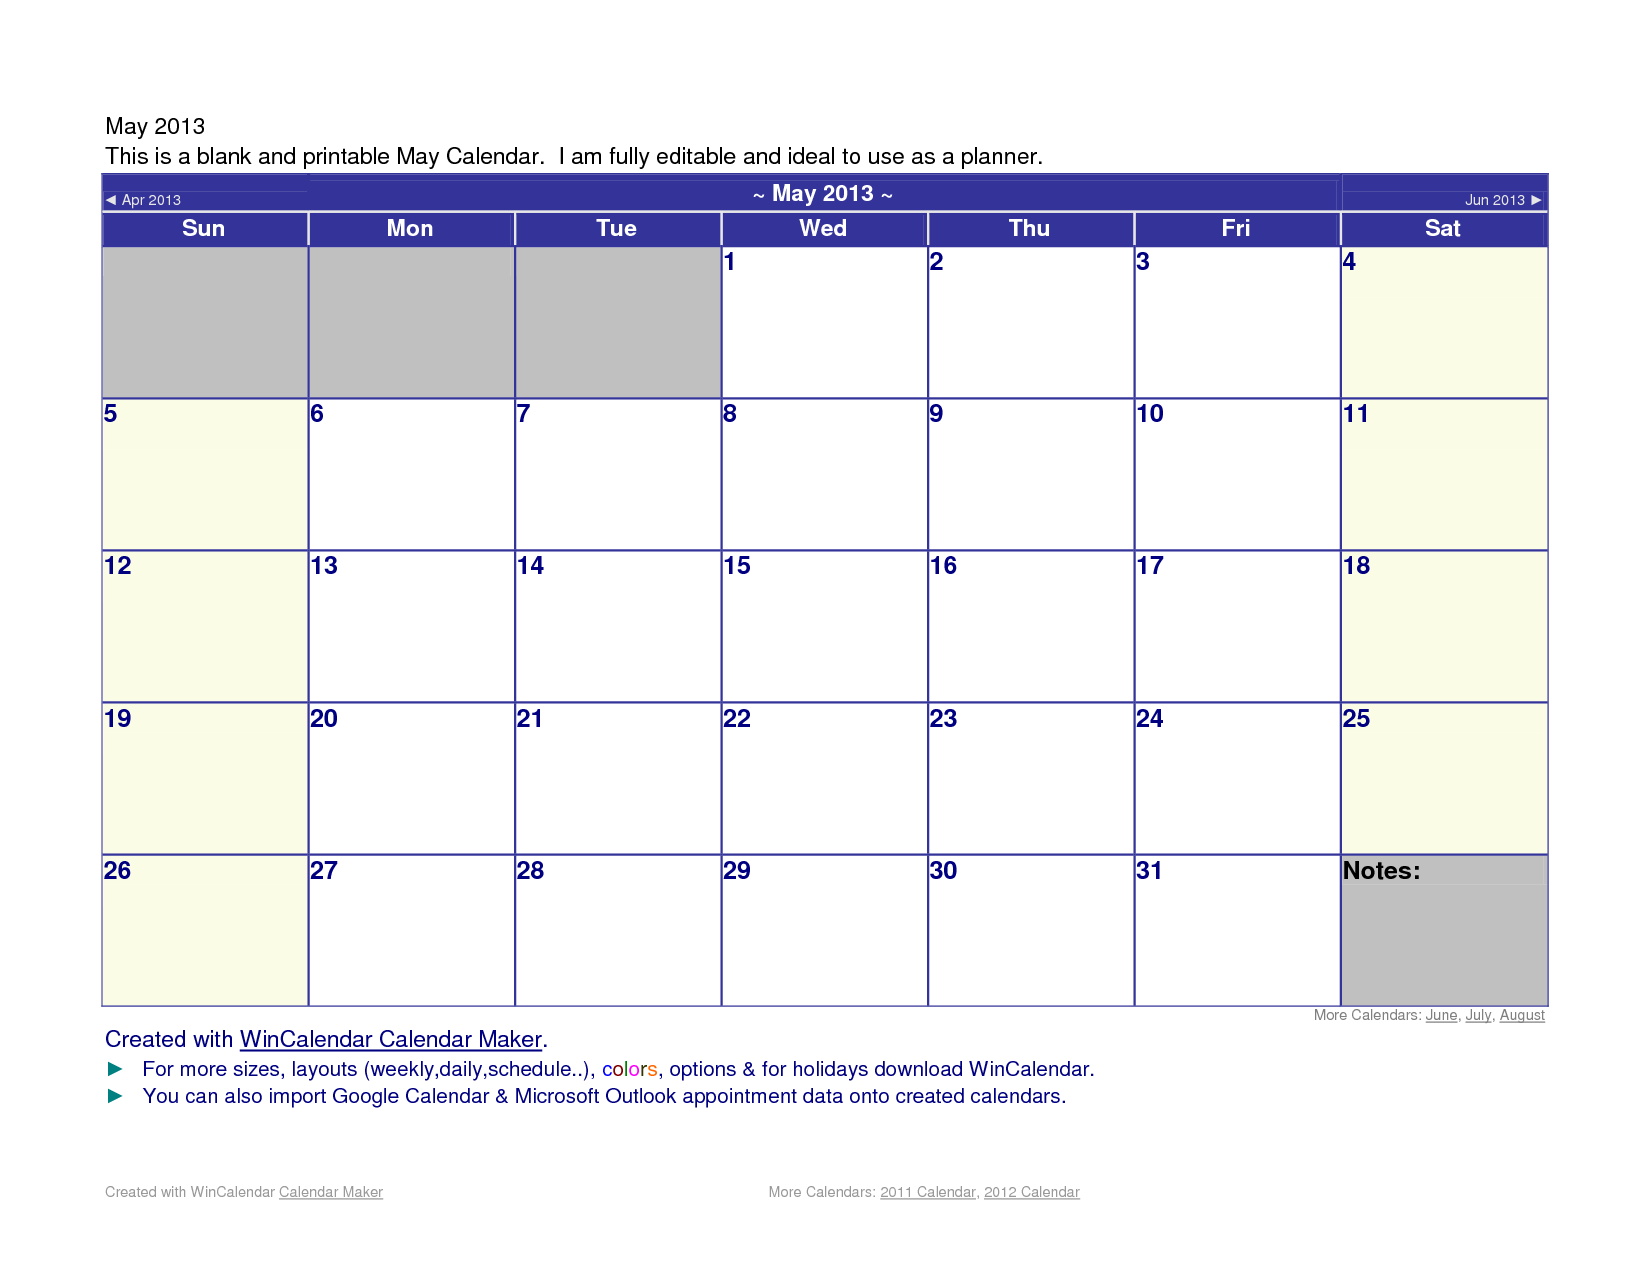 4 Best Images of Printable Blank Calendar May 2013 - Blank May 2013 ...